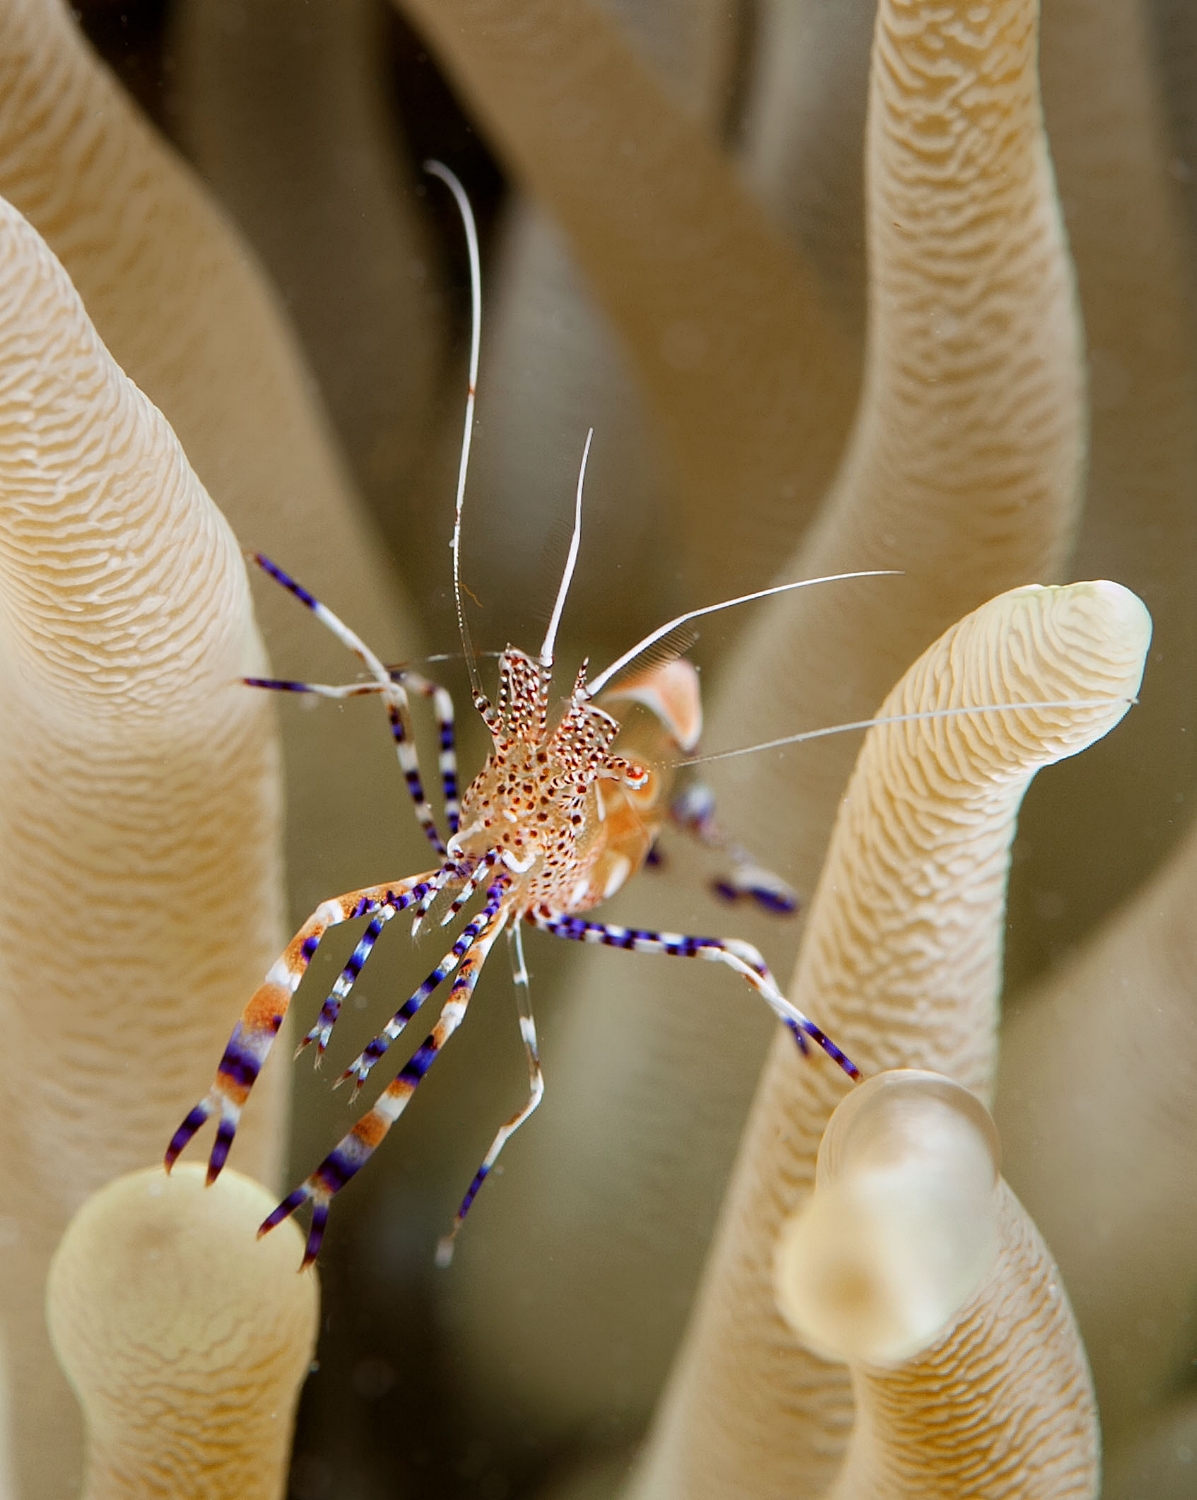  A 1/2" long spotted Cleaner shrimp (Periclimenes yucatanicus) dances among the tentacles of a Giant anemone (Condylactis gigantea) in Bonaire on Monday, April 2, 2012. 